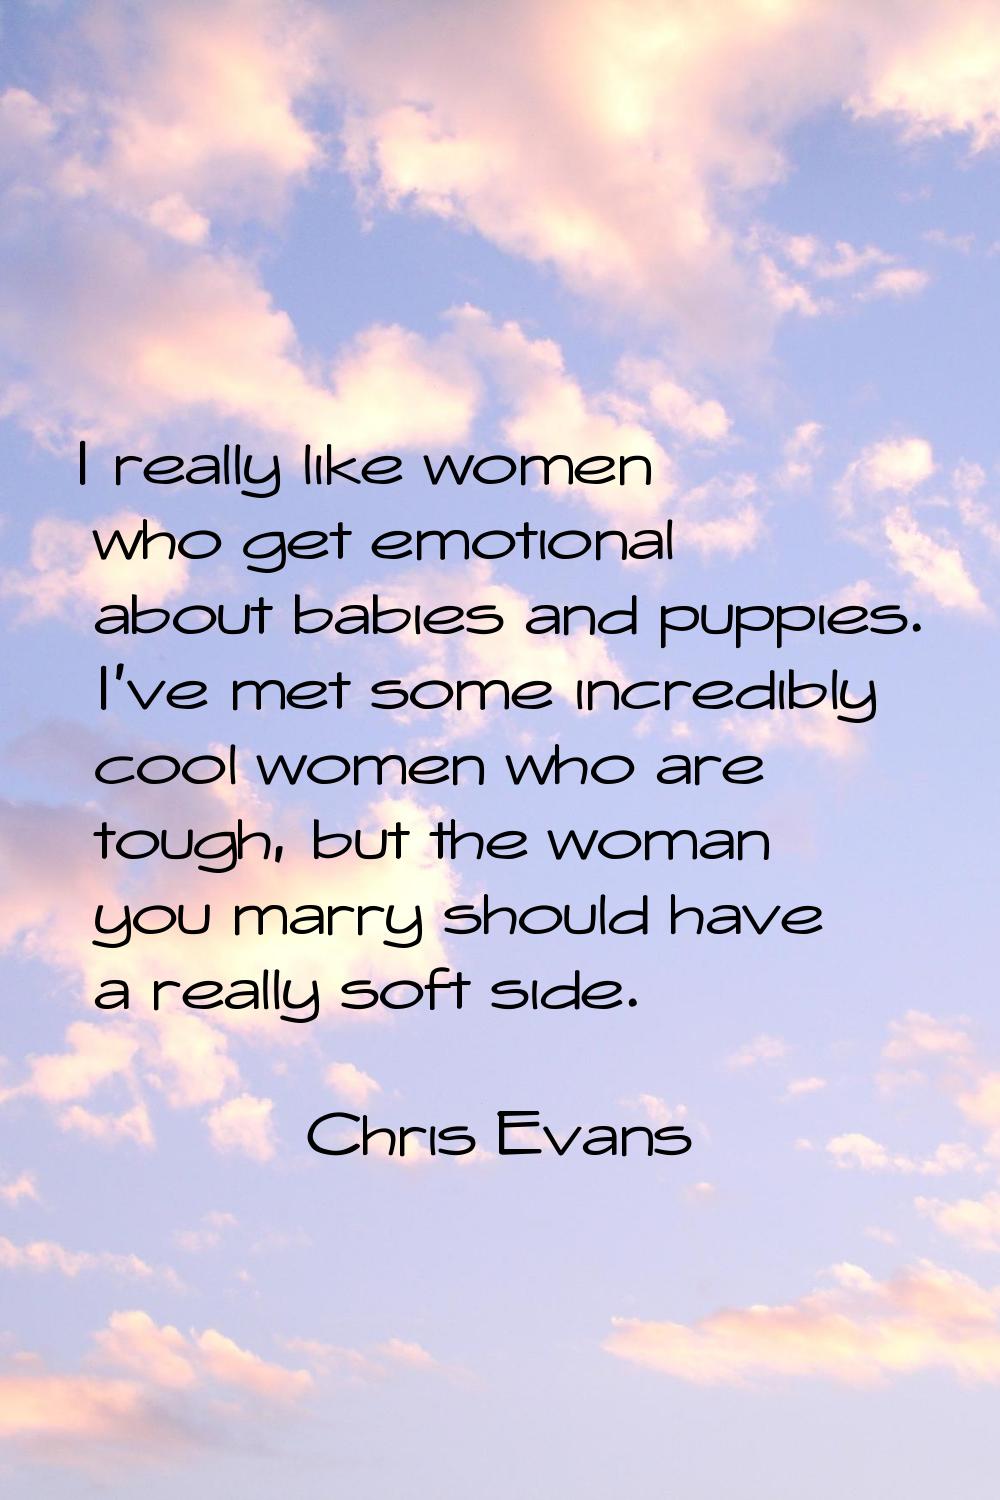 I really like women who get emotional about babies and puppies. I've met some incredibly cool women